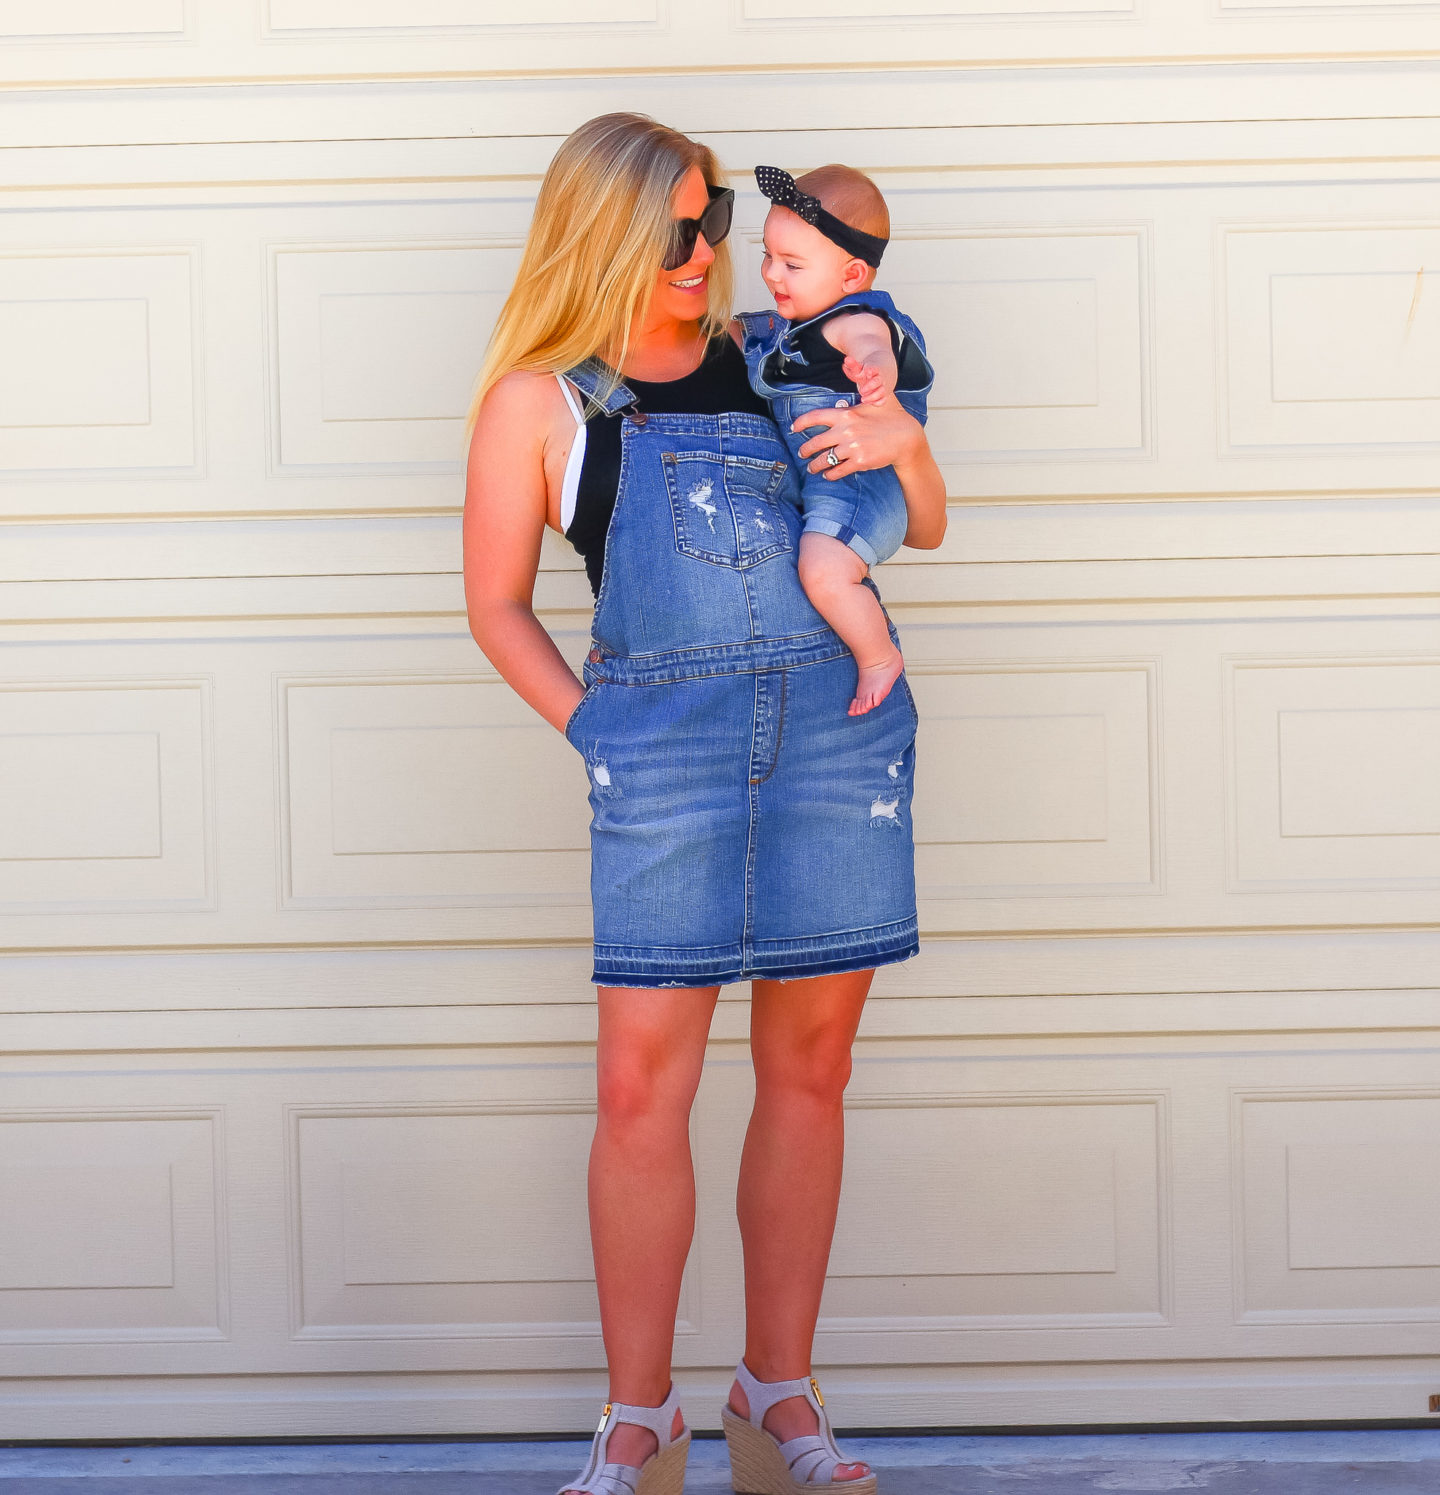 jean overalls for baby girl